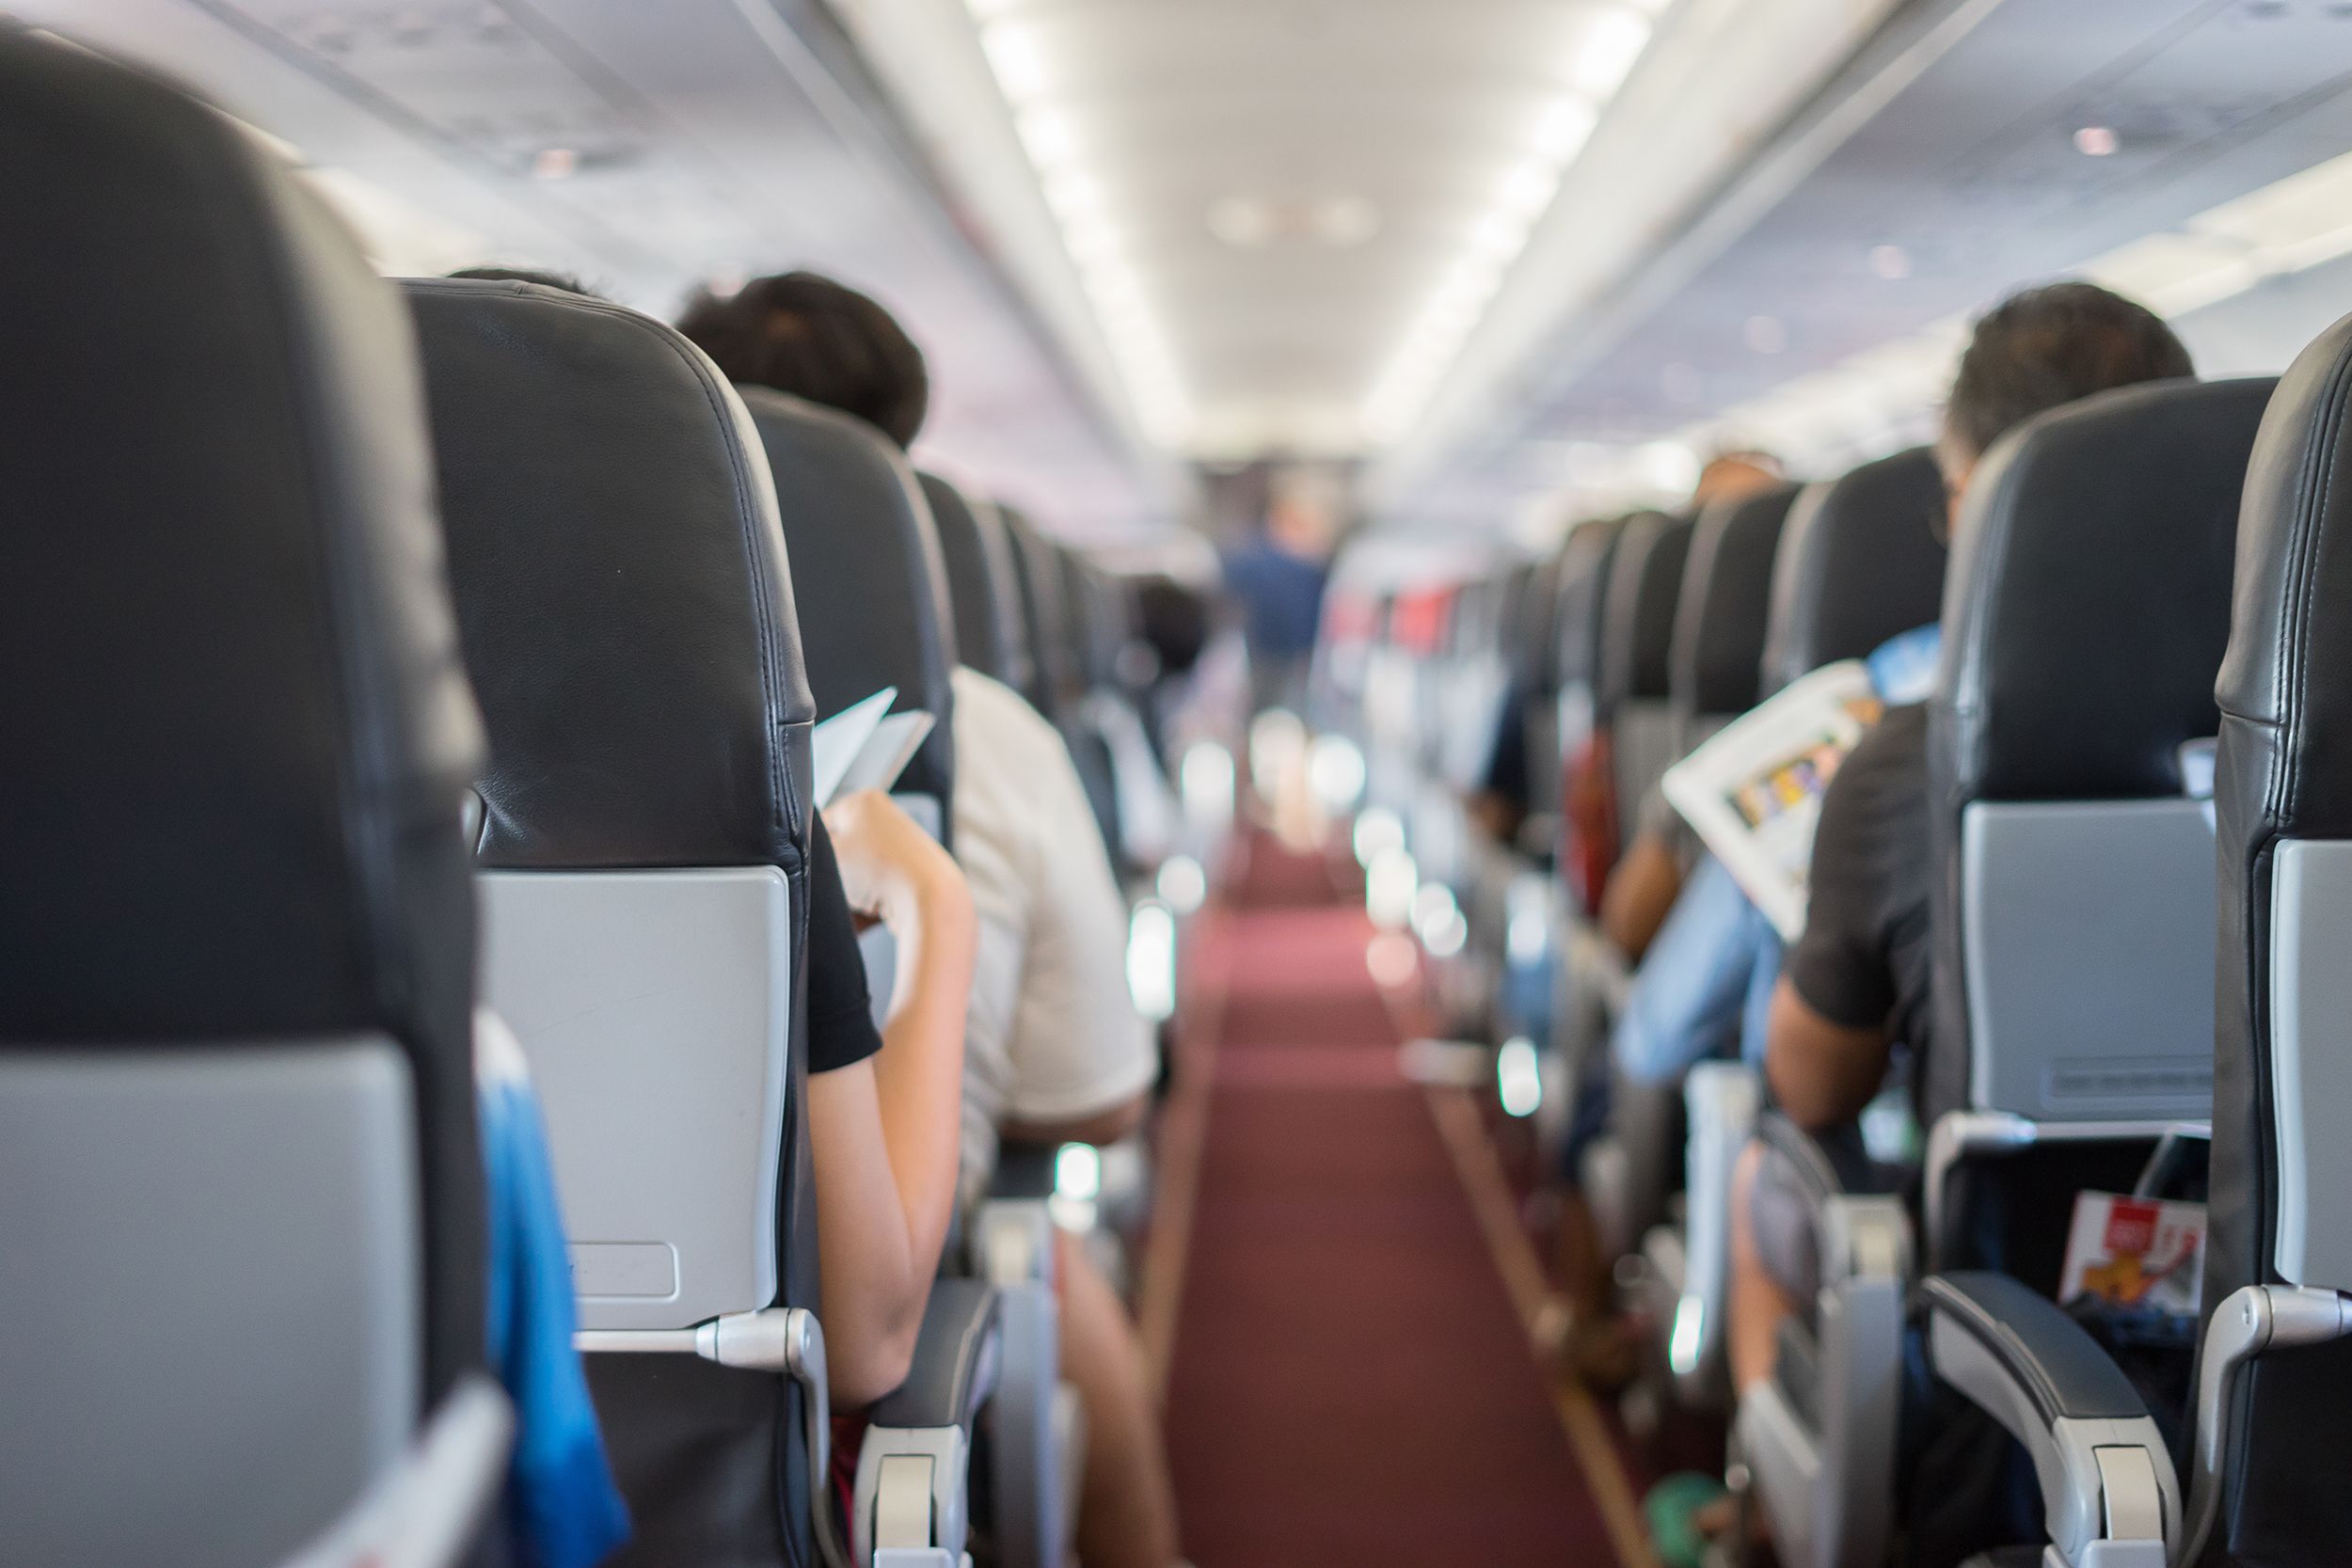 Airline seats keep getting smaller. The FAA could stop that - Los